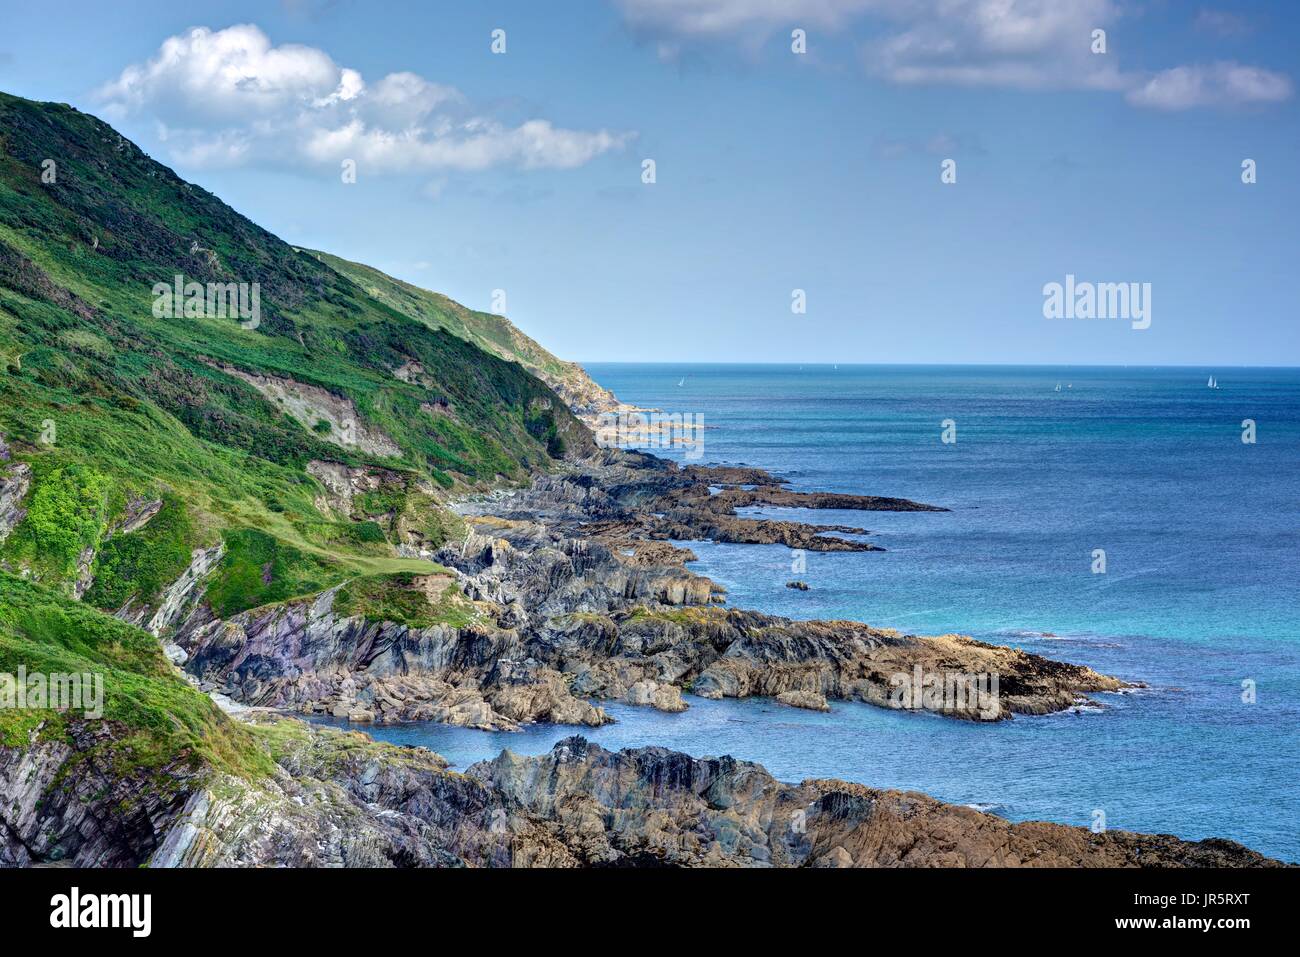 A beautiful picturesque landscape of Cornish coastline with azure blue sea taken from a stretch of the South West Coast Path looking towards Polperro. Stock Photo